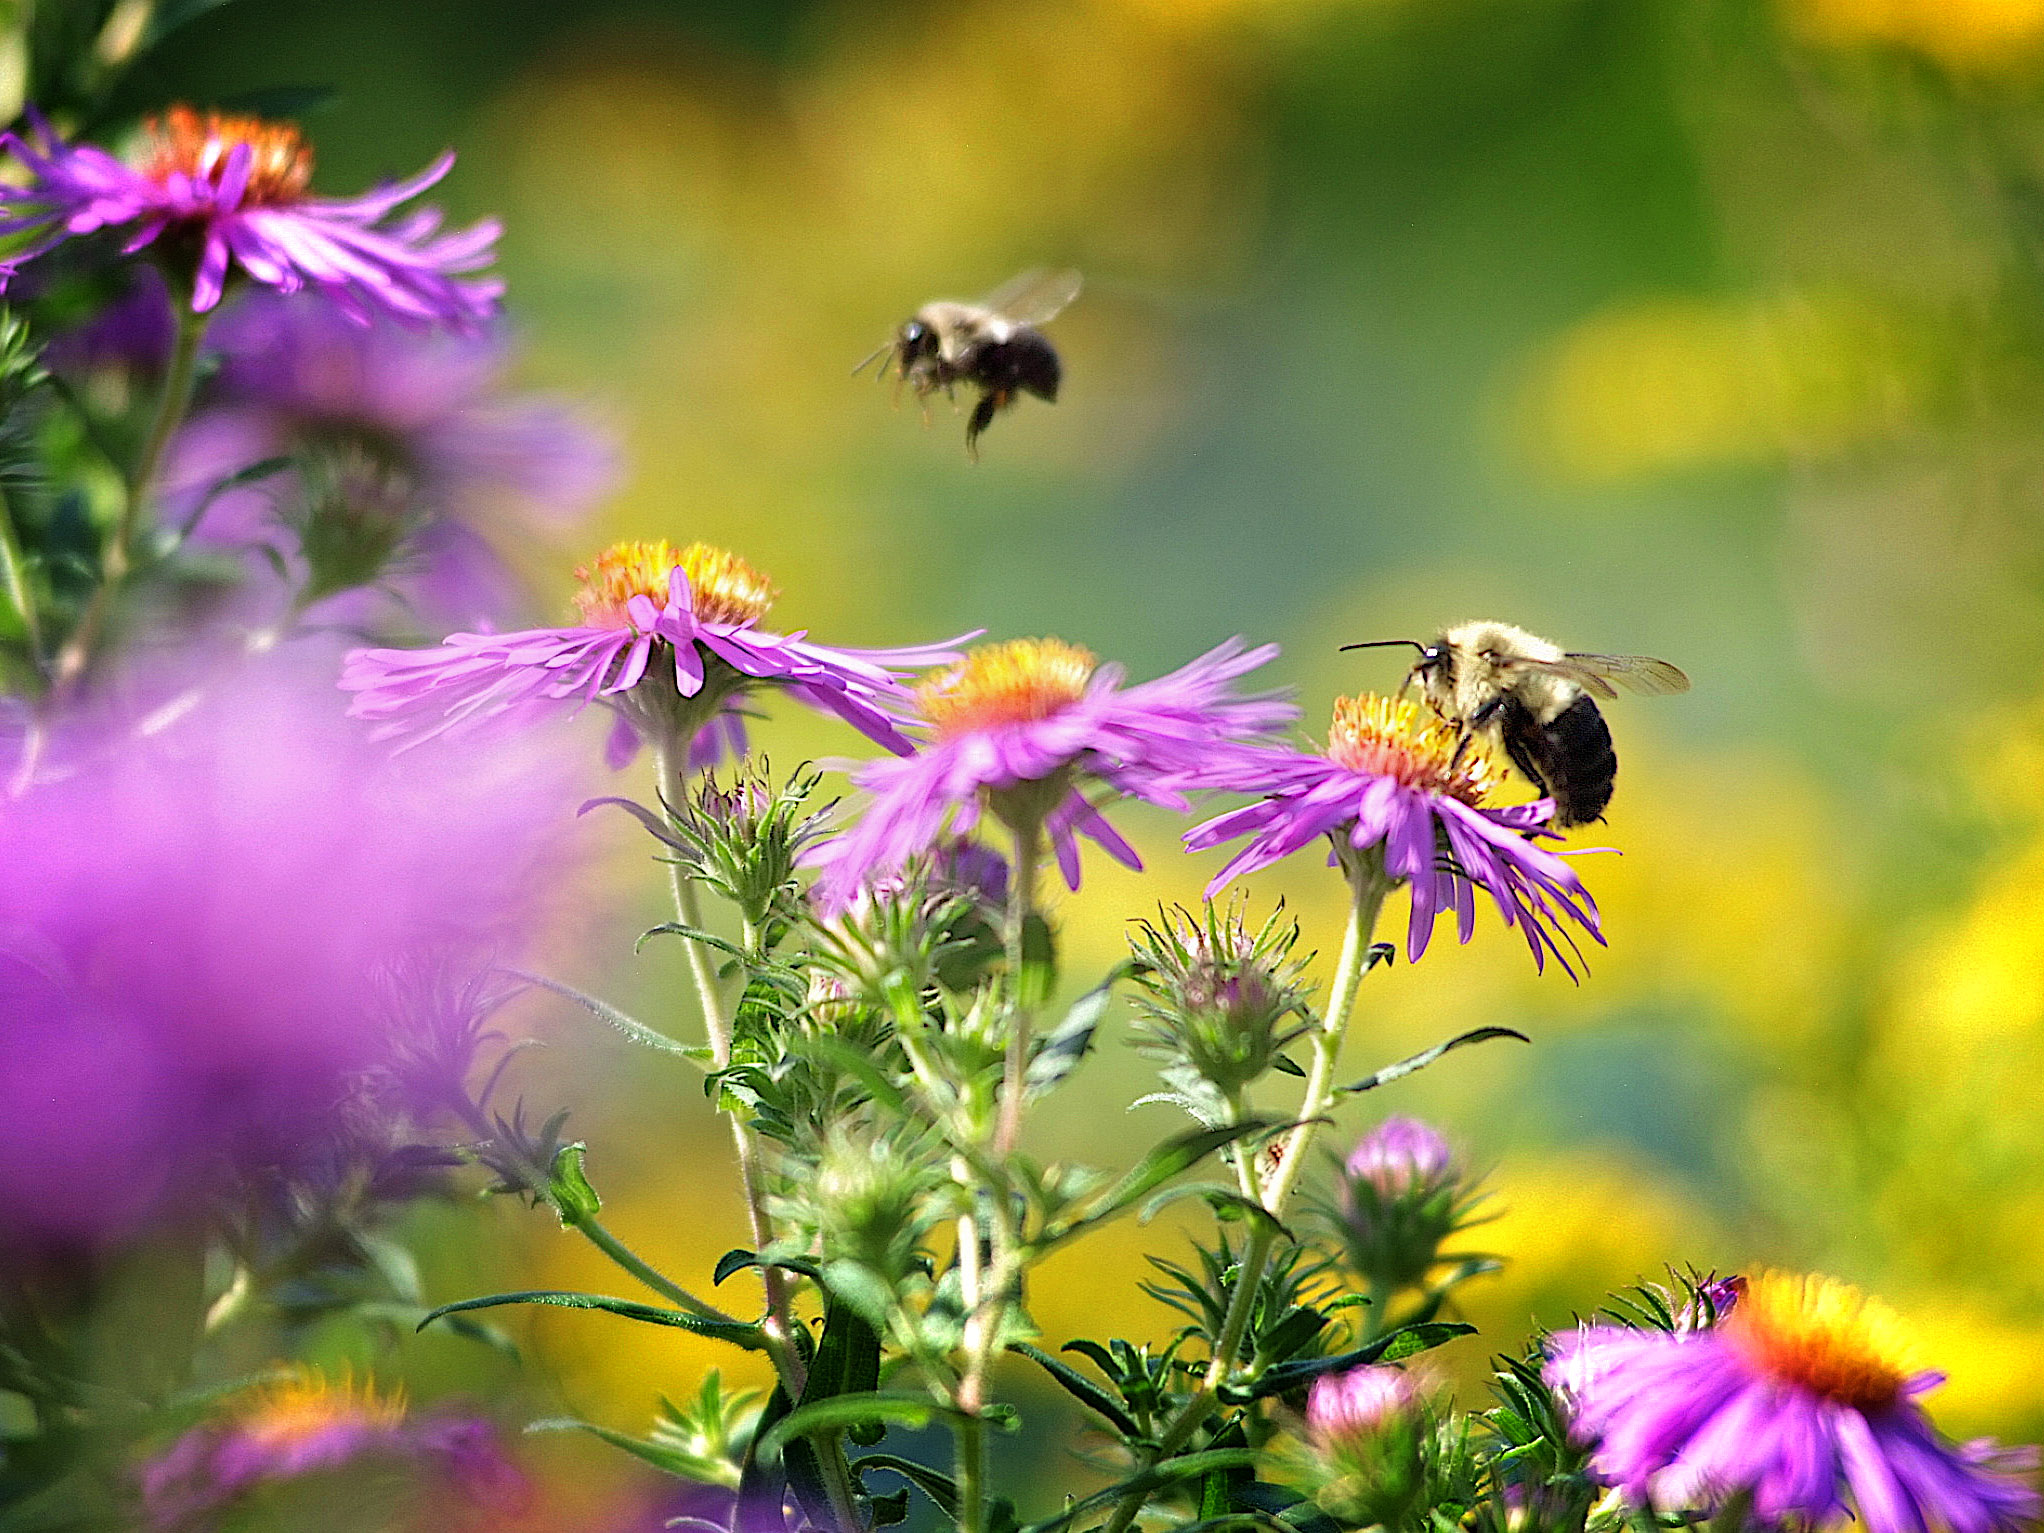 A color photo of bees buzzing around pink flowers.